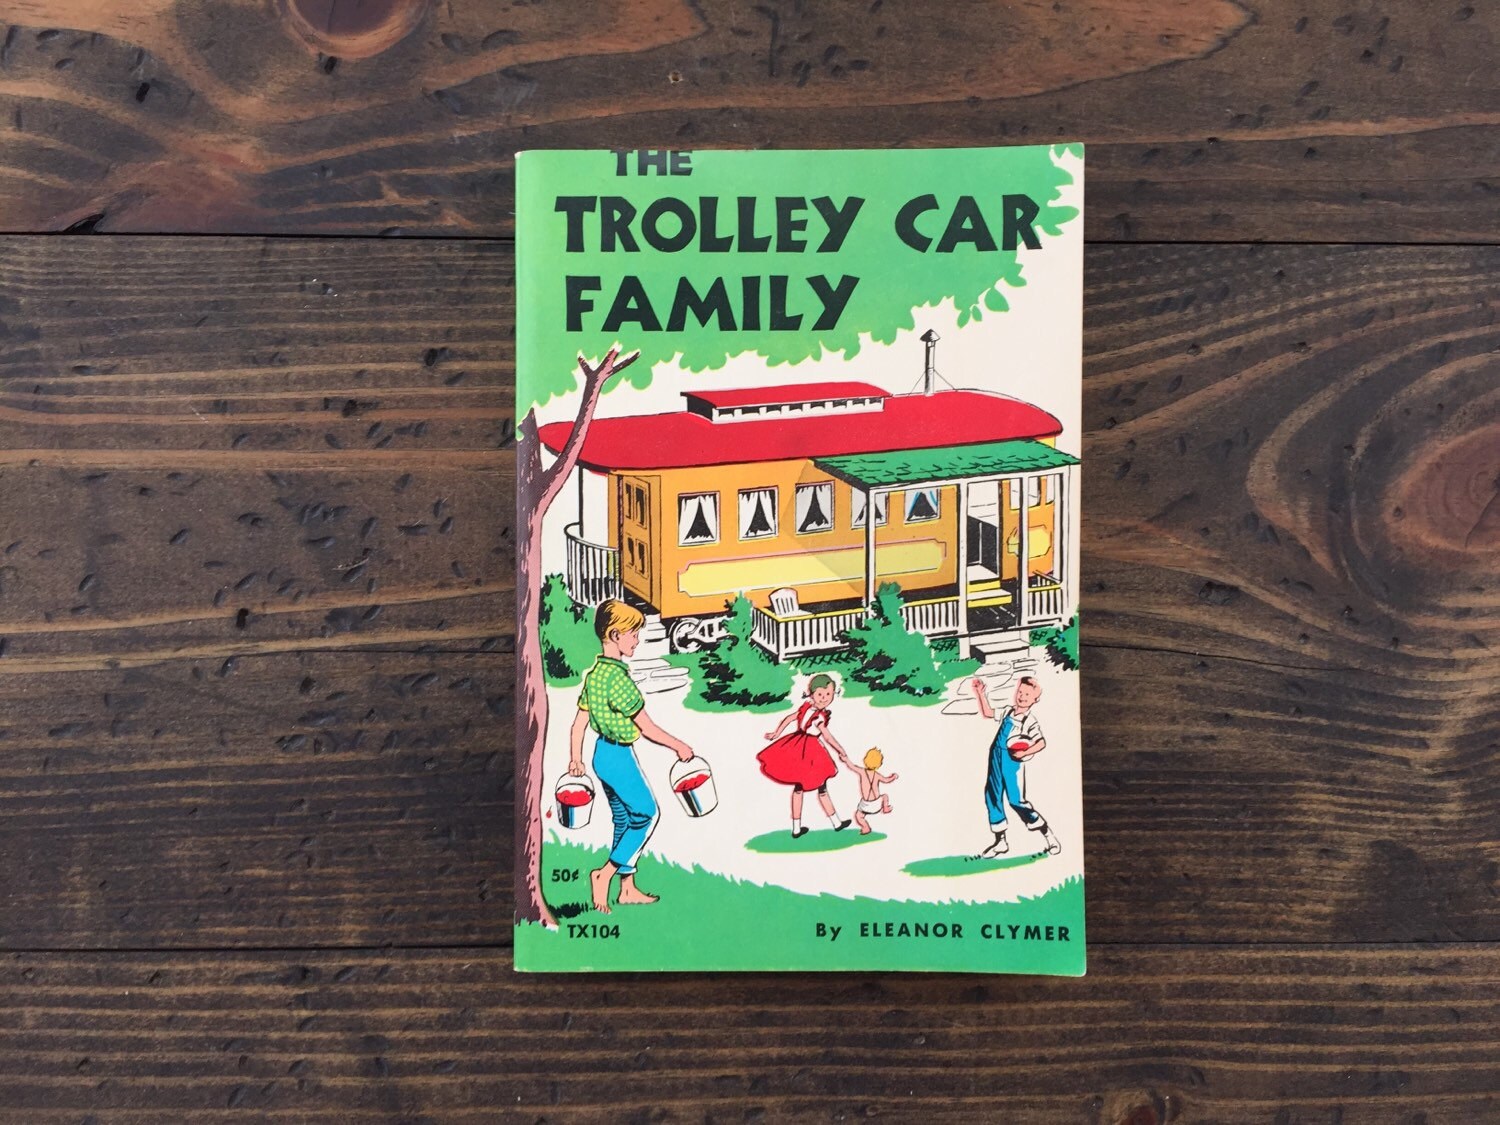 The Trolley Car Family by Eleanor Clymer